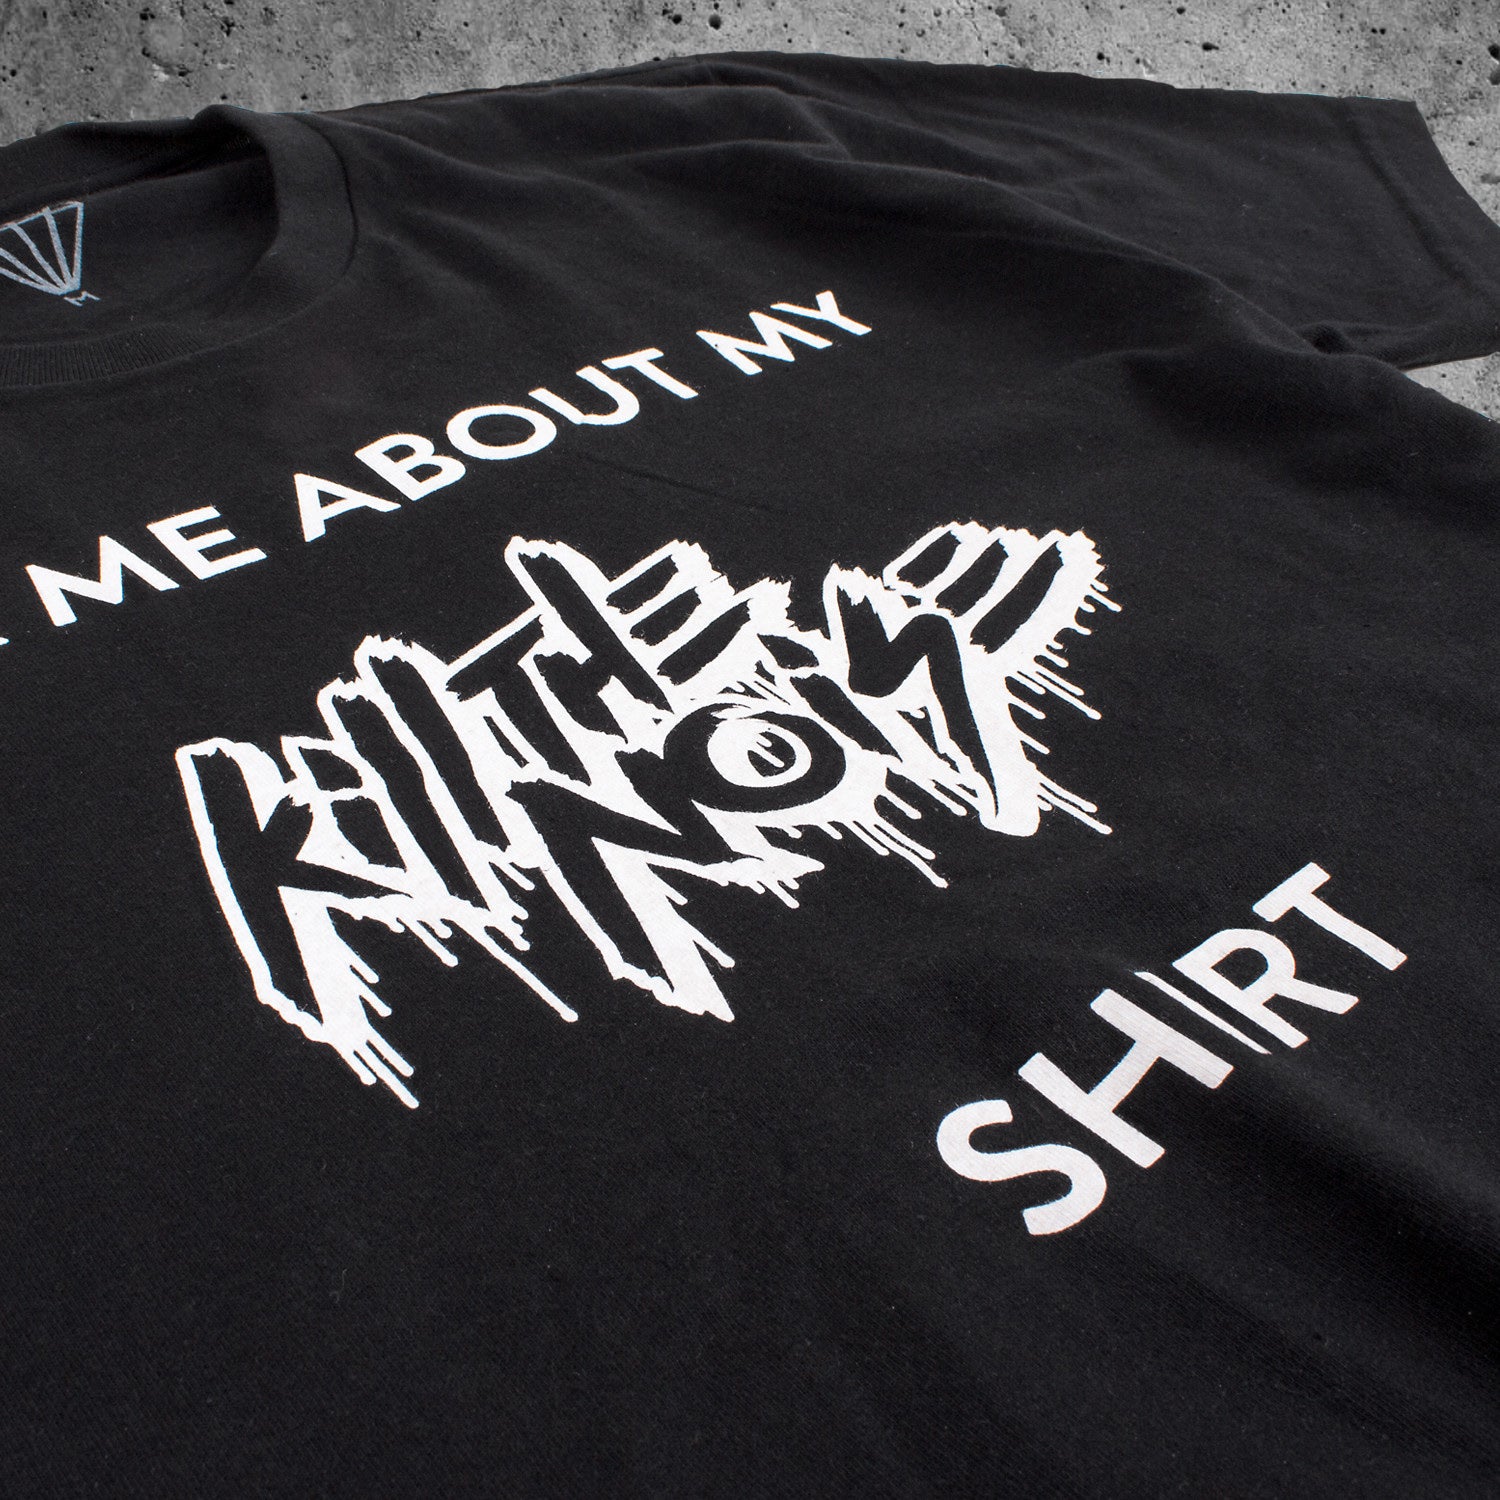 'Ask Me About My KTN' T-Shirt detail